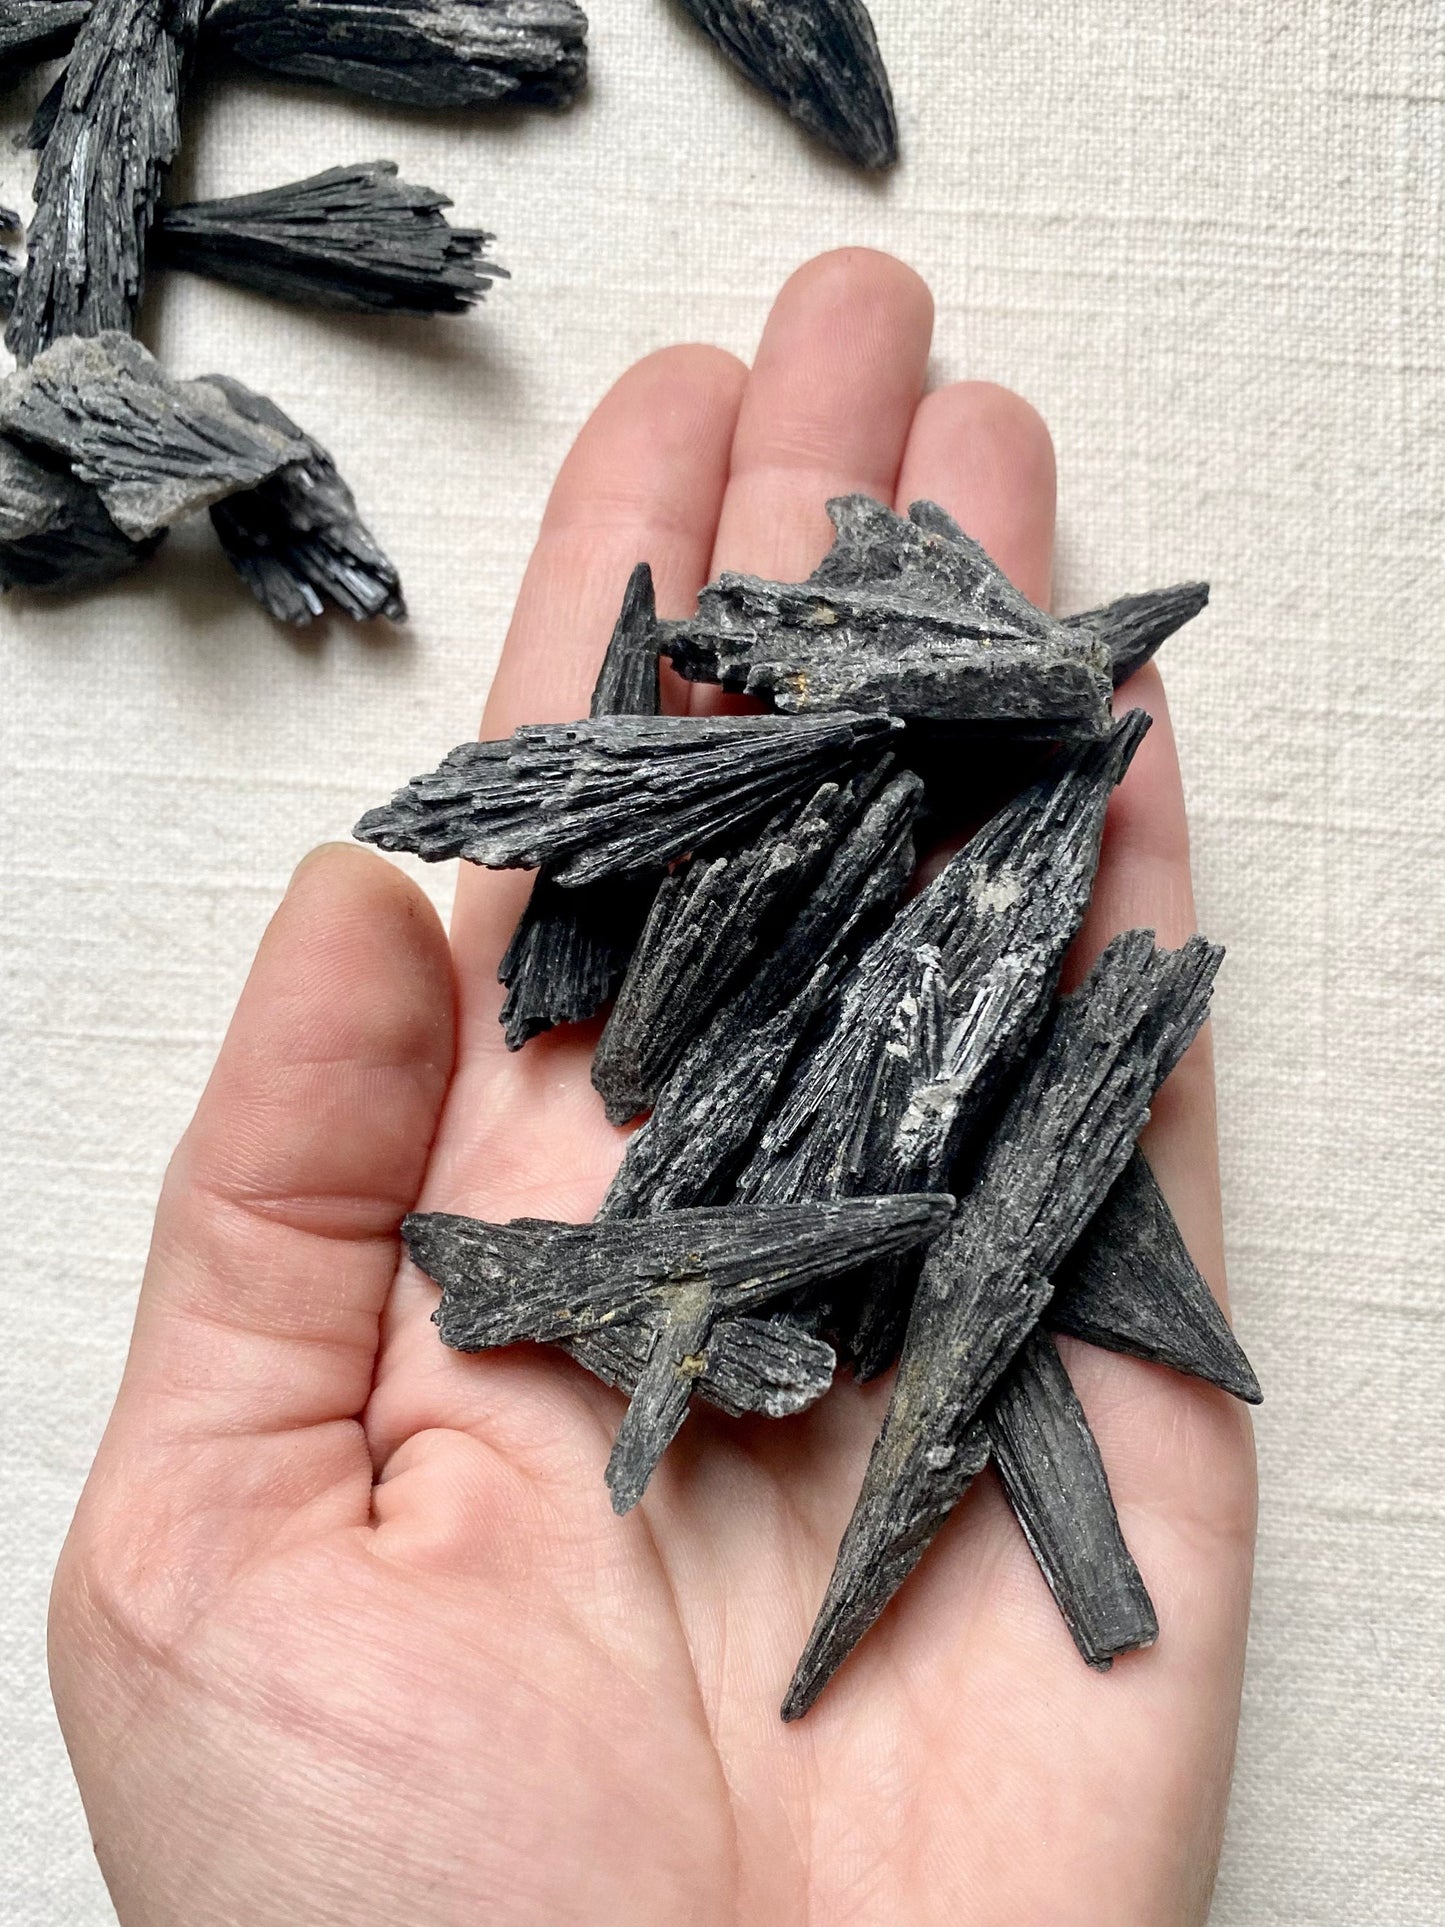 Lot of Black Kyanite Fans - 1 pound of Raw Crystal Clusters